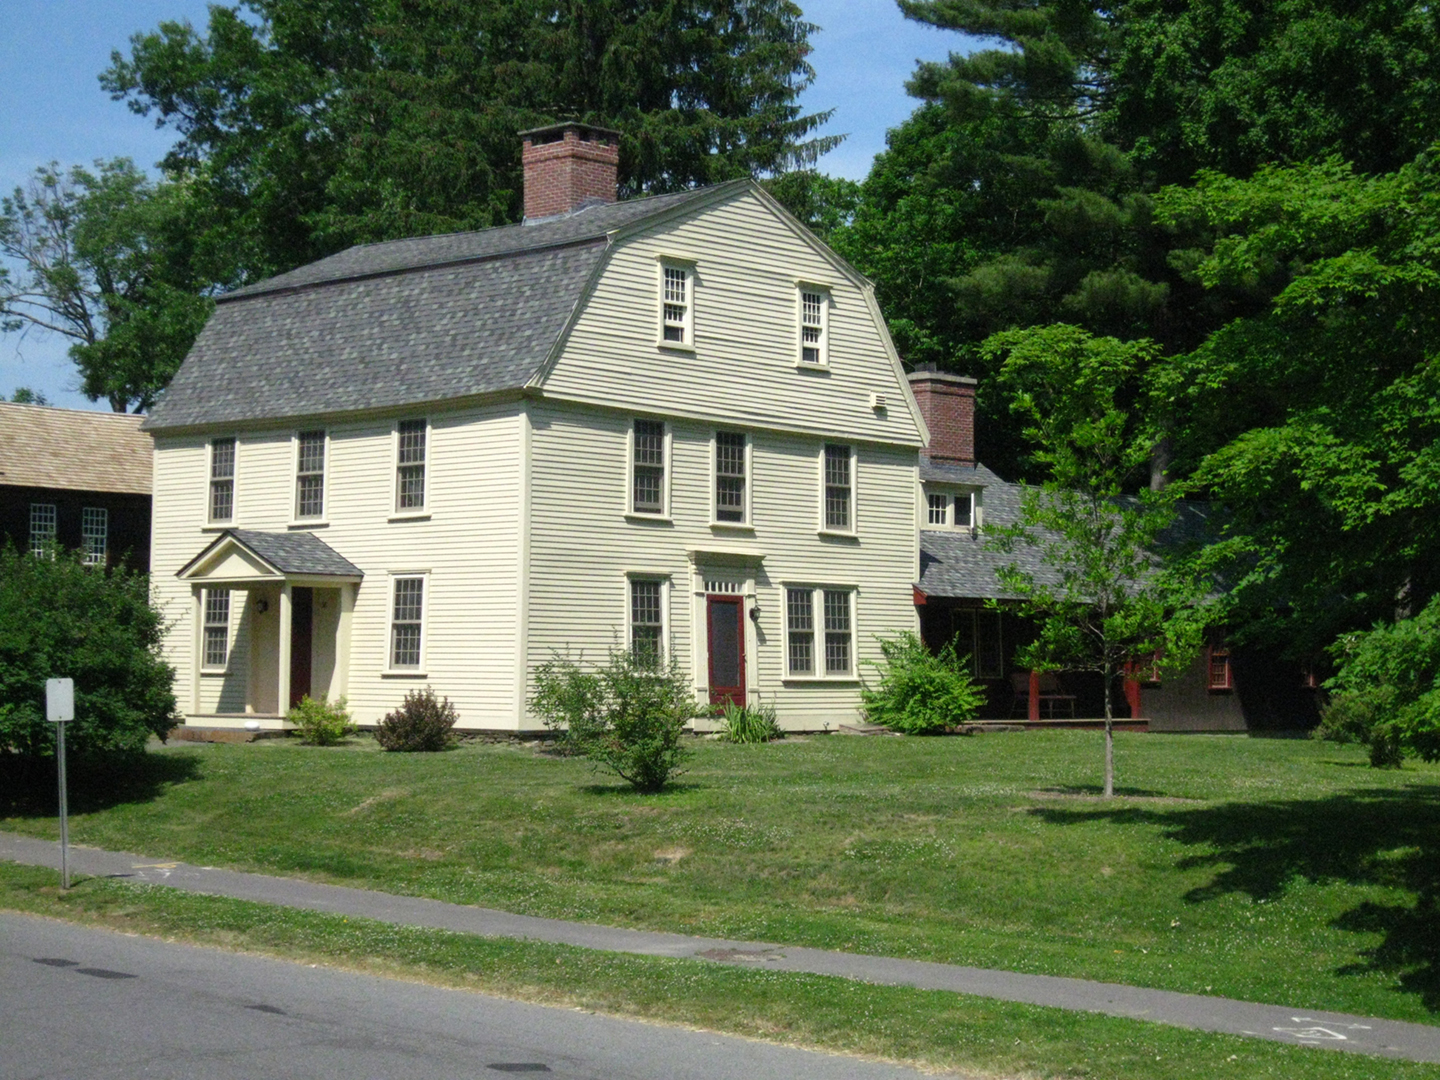 Nims house, Deerfield, Mass., 1722, 1792. Photo by William Flynt.